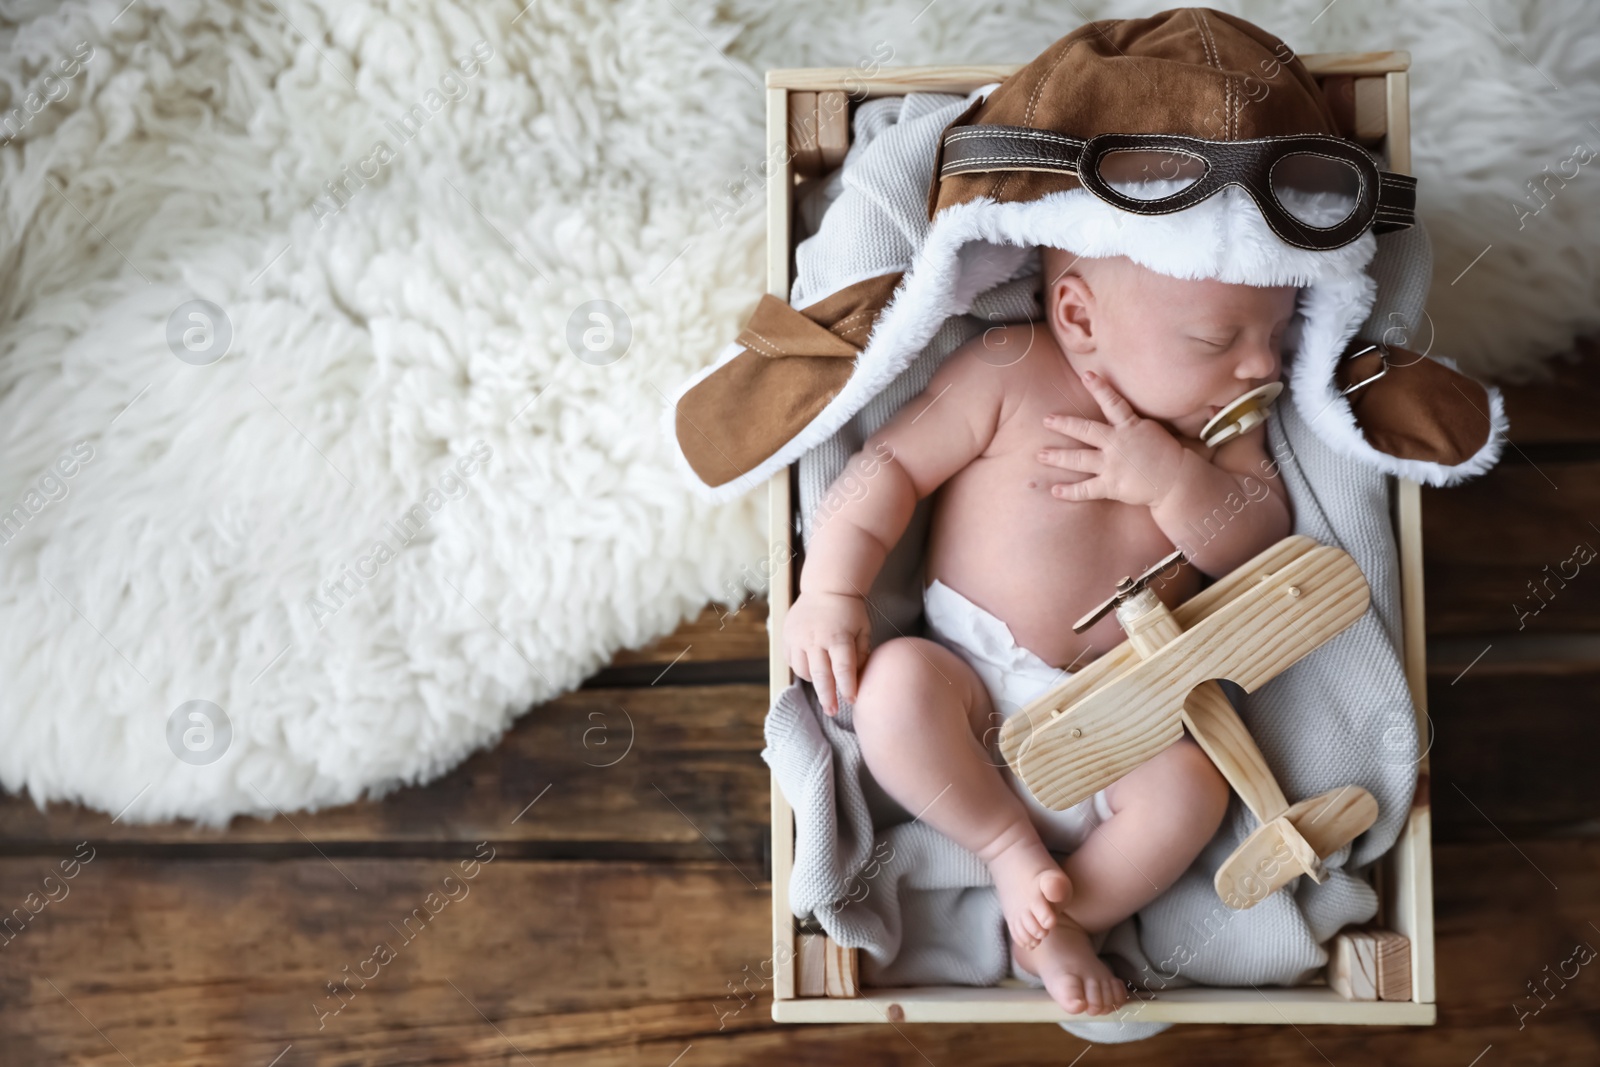 Photo of Cute newborn baby wearing aviator hat with toy sleeping in wooden crate, top view. Space for text